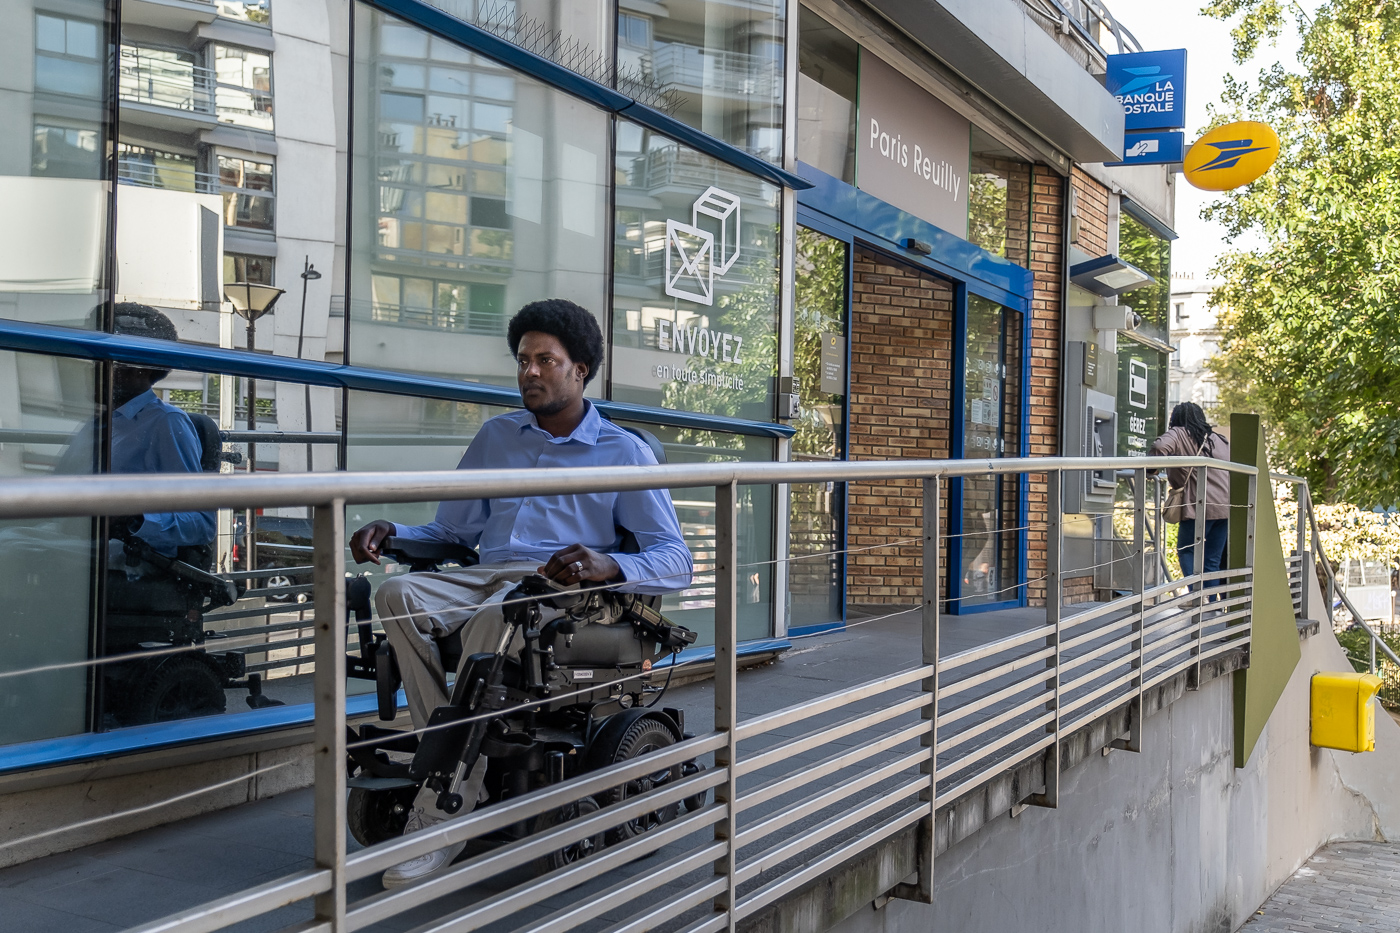 Souleyman Youssouf, a resident of the 12th arrondissement, uses his electric wheelchair to explore the Quartier d'accessibilité augmentée in the 12th arrondissement.